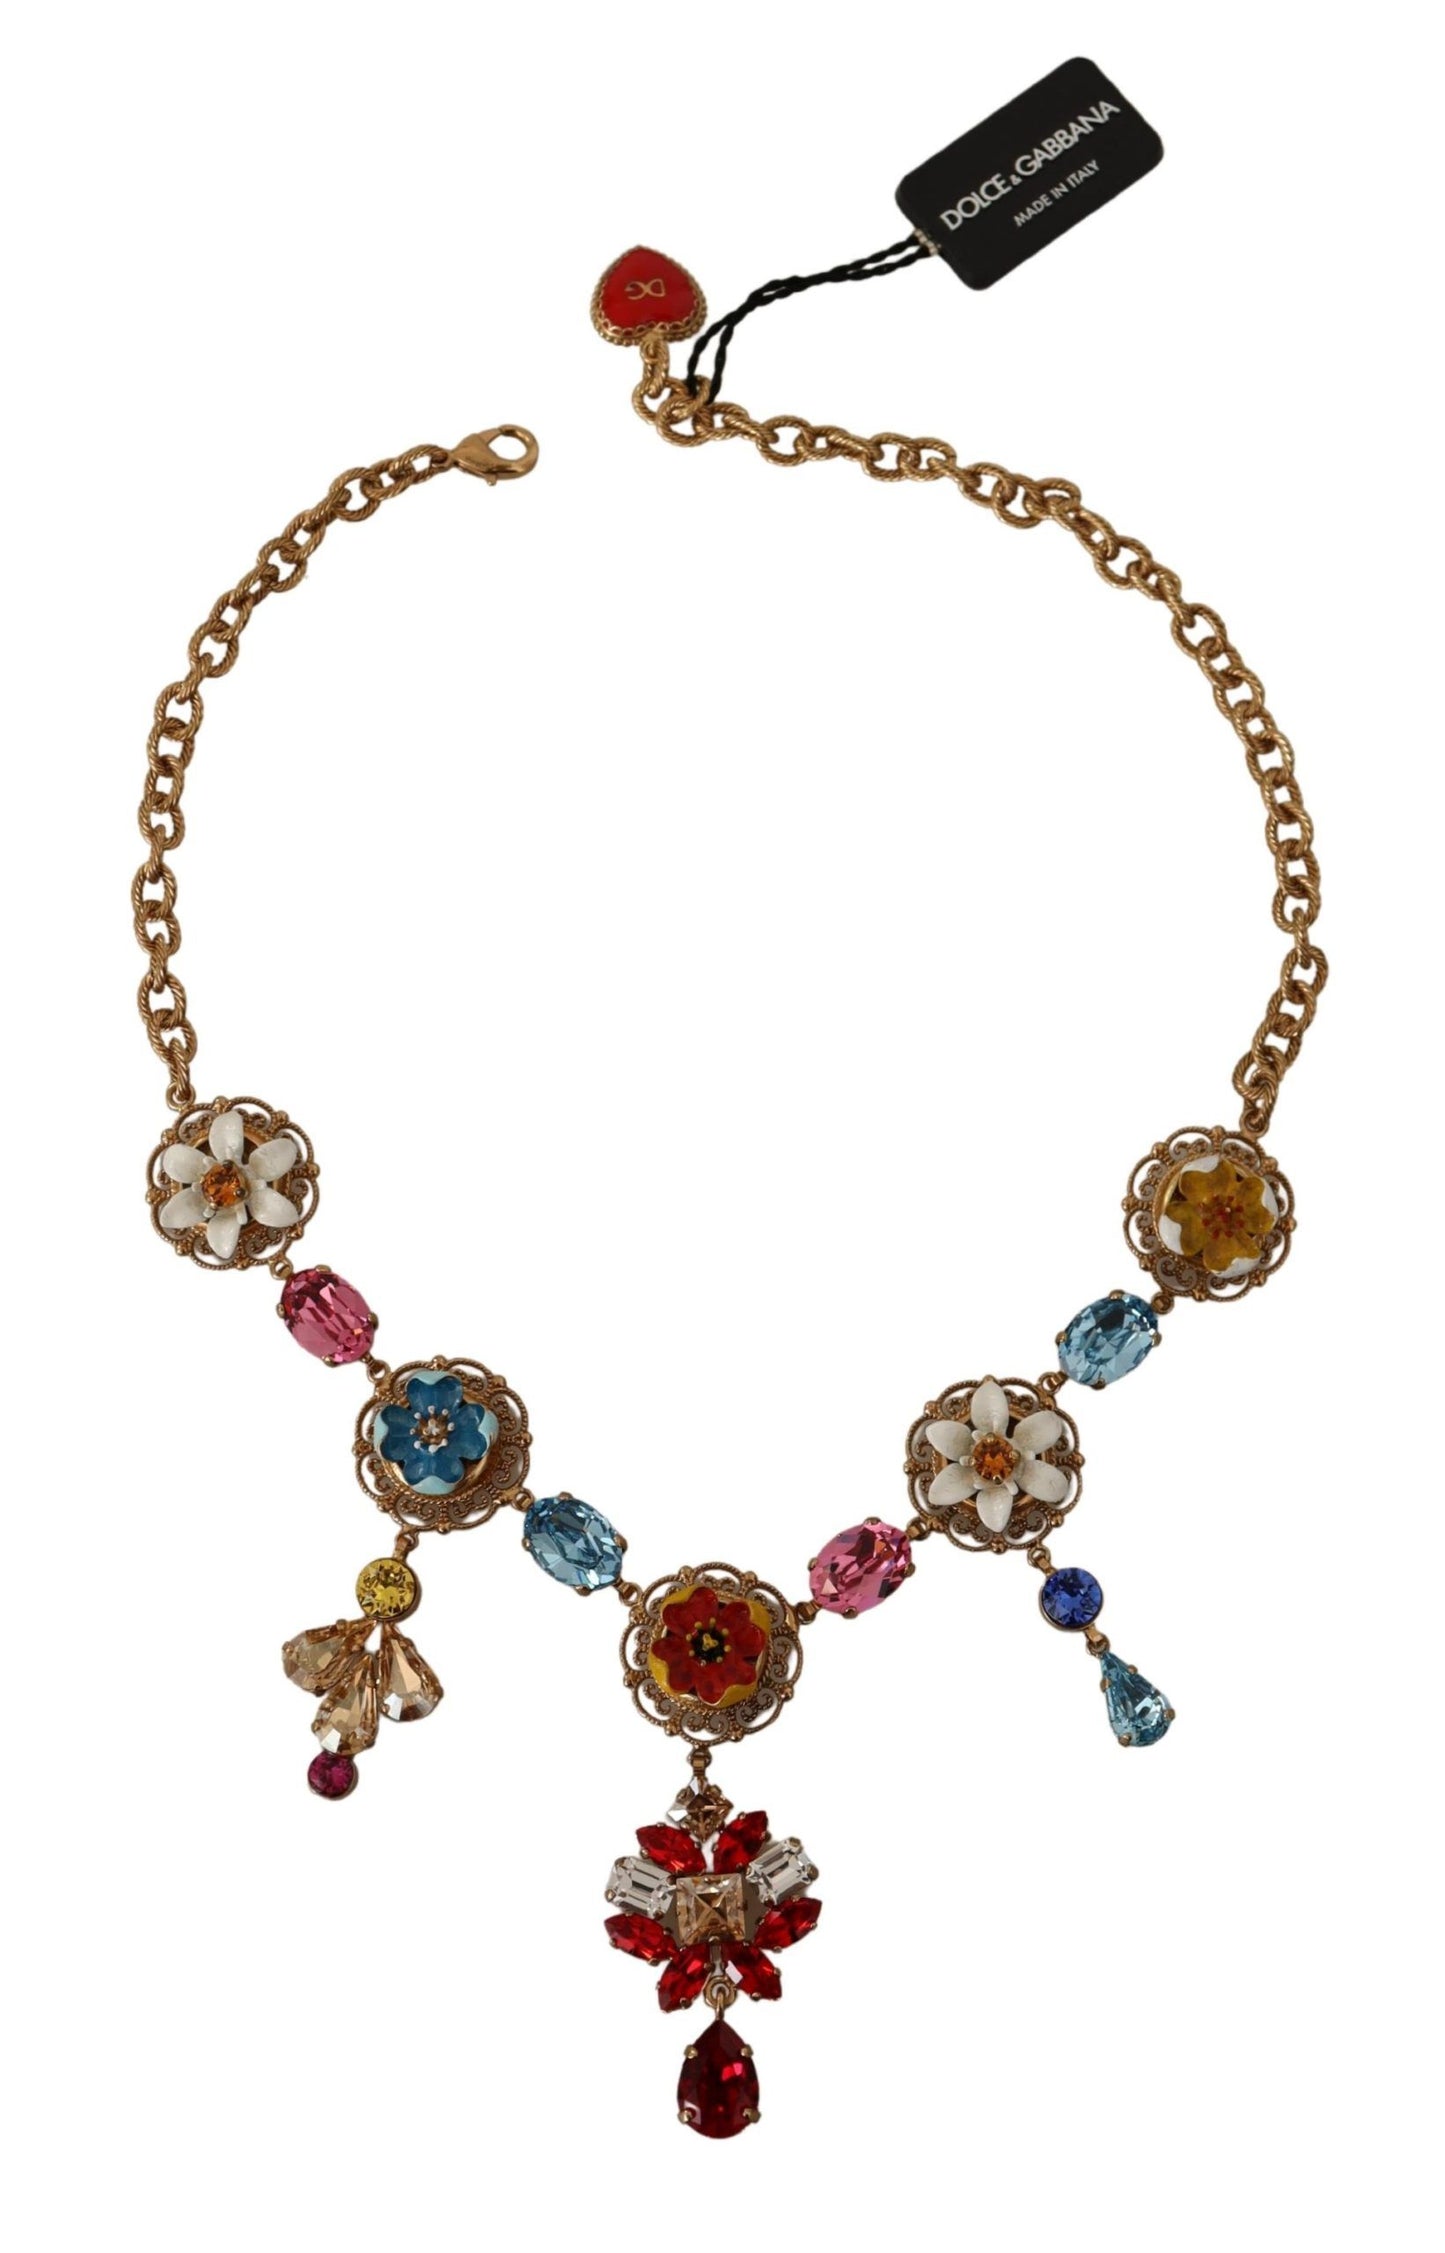 Dolce & Gabbana Gold Messing Floral Sizilien Charms Statement Halskette